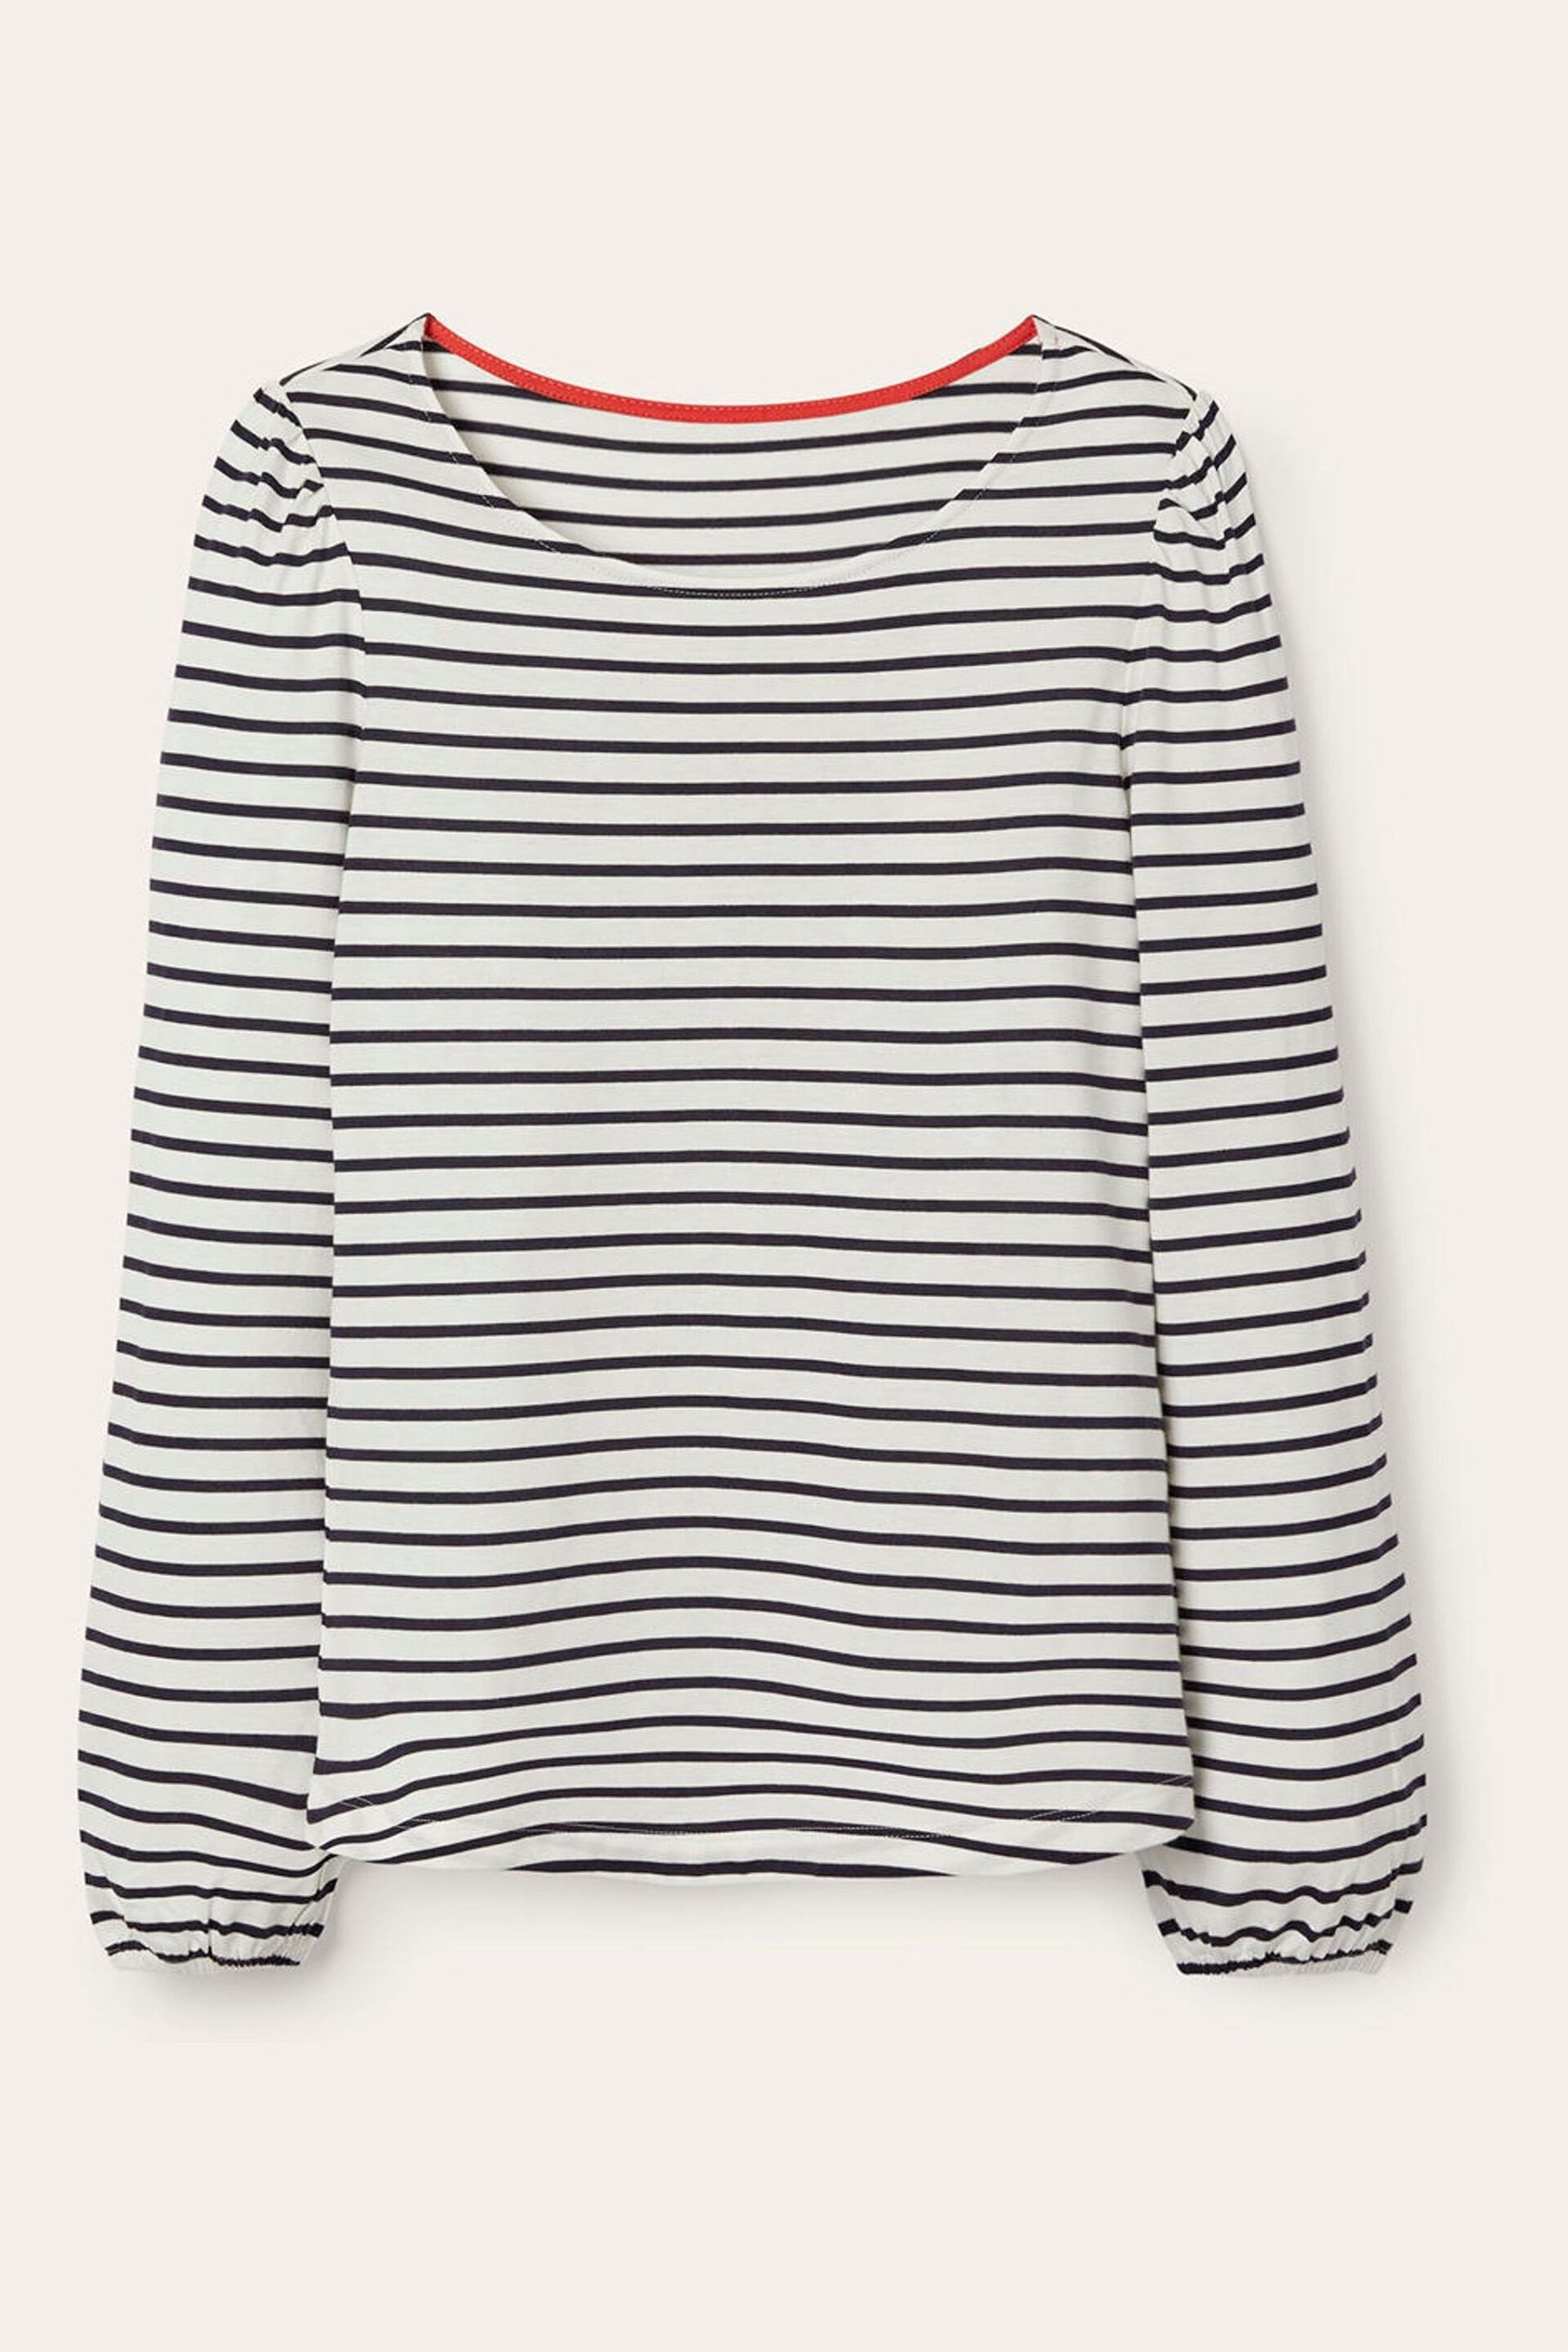 Boden Cream Supersoft Long Sleeve Top - Image 5 of 5